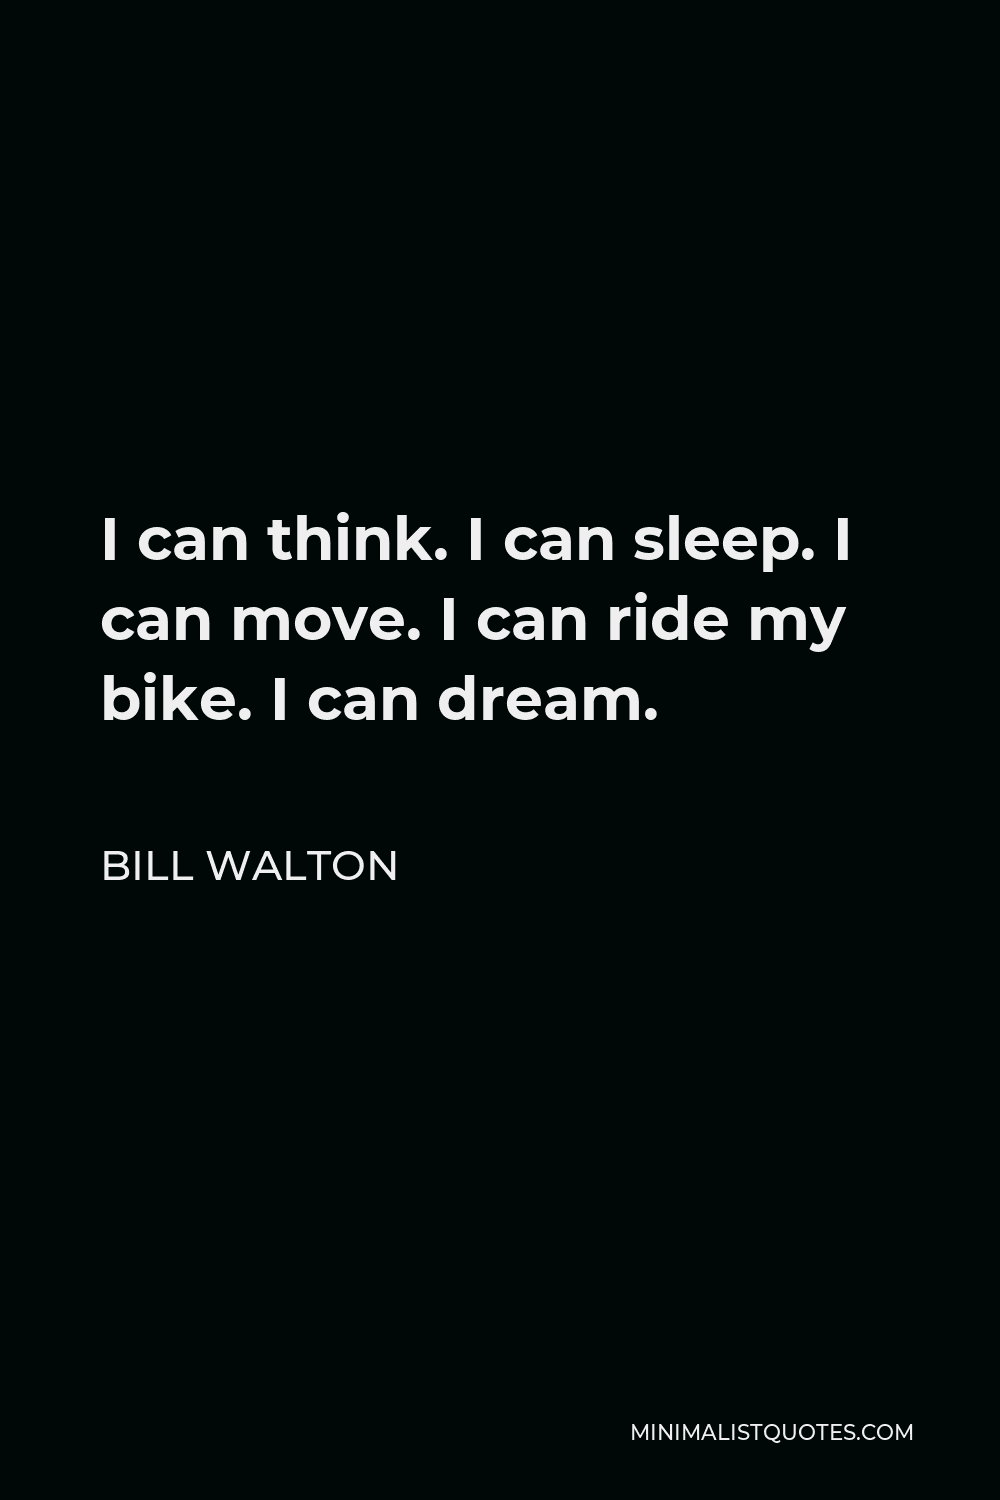 Bill Walton Quote - I can think. I can sleep. I can move. I can ride my bike. I can dream.